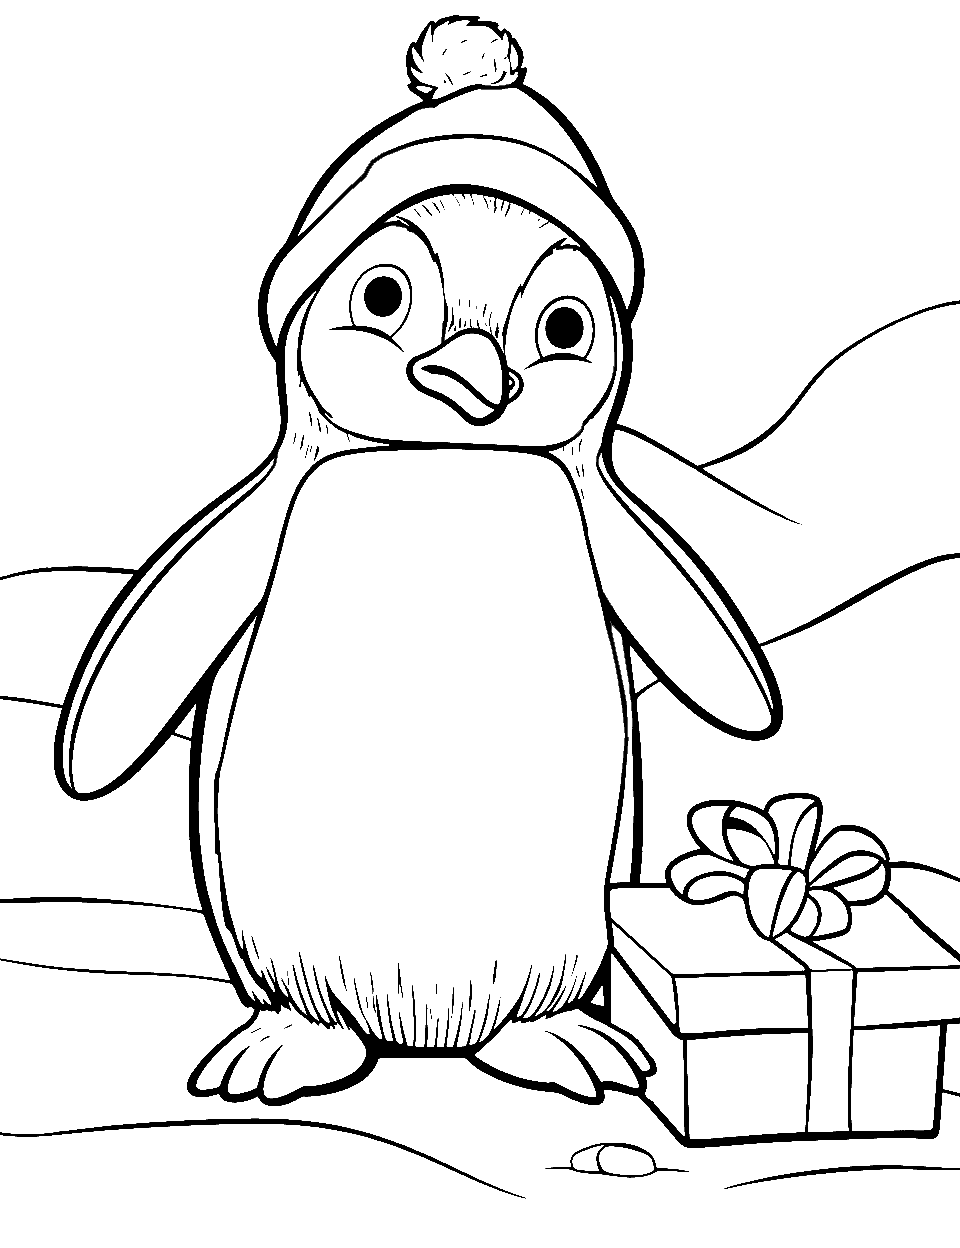 Gift-Giving Penguin Coloring Page - A penguin offering a wrapped gift.